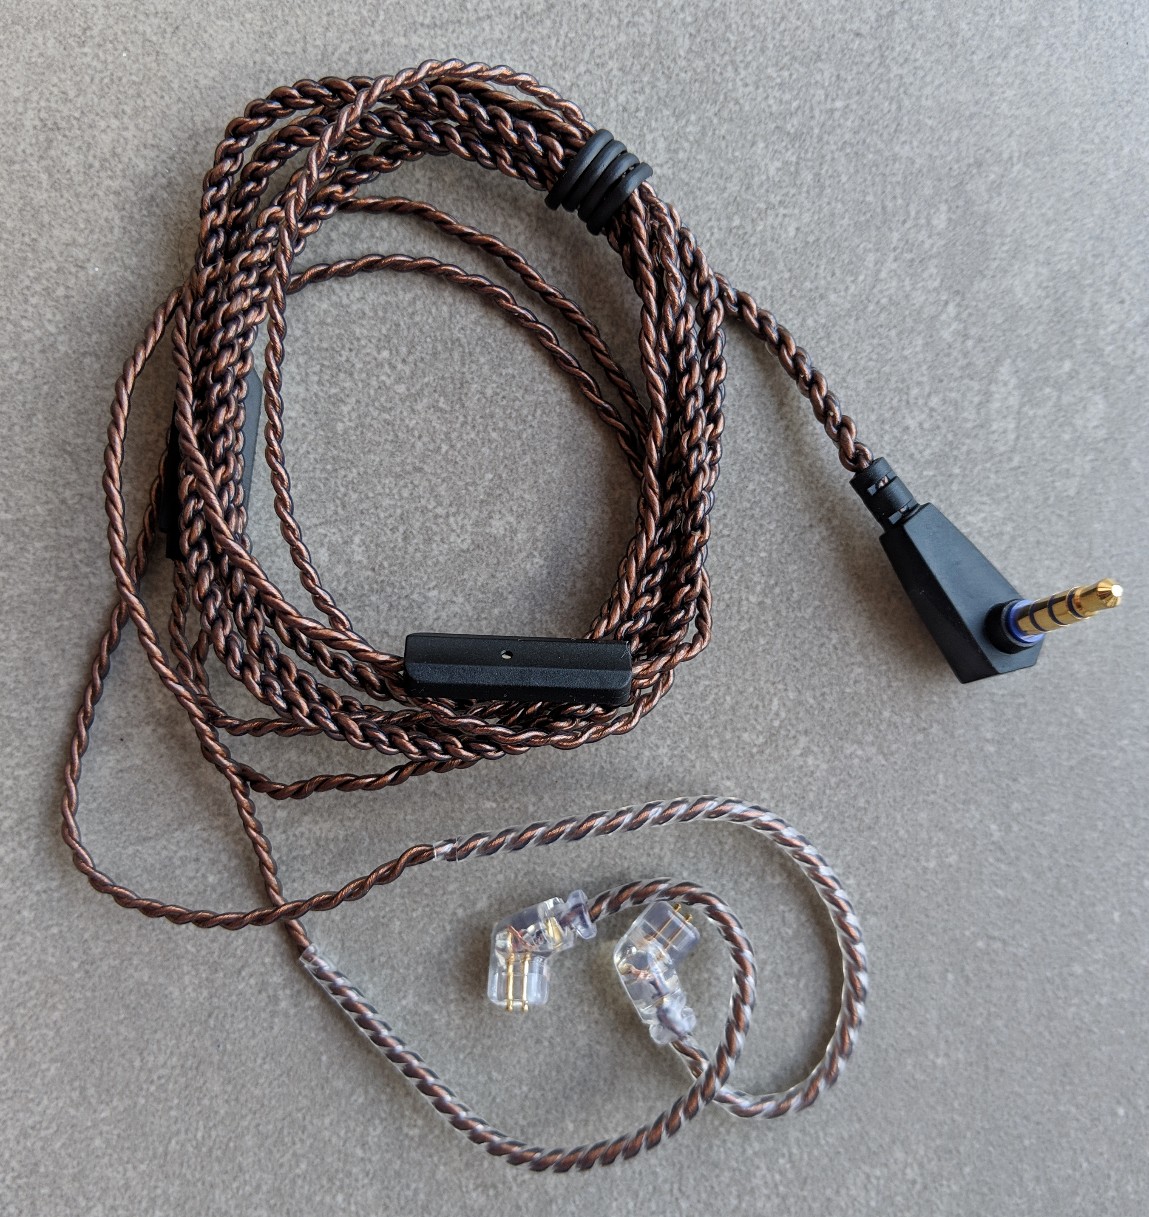 Kz Zsx Review Another One Audiophile On